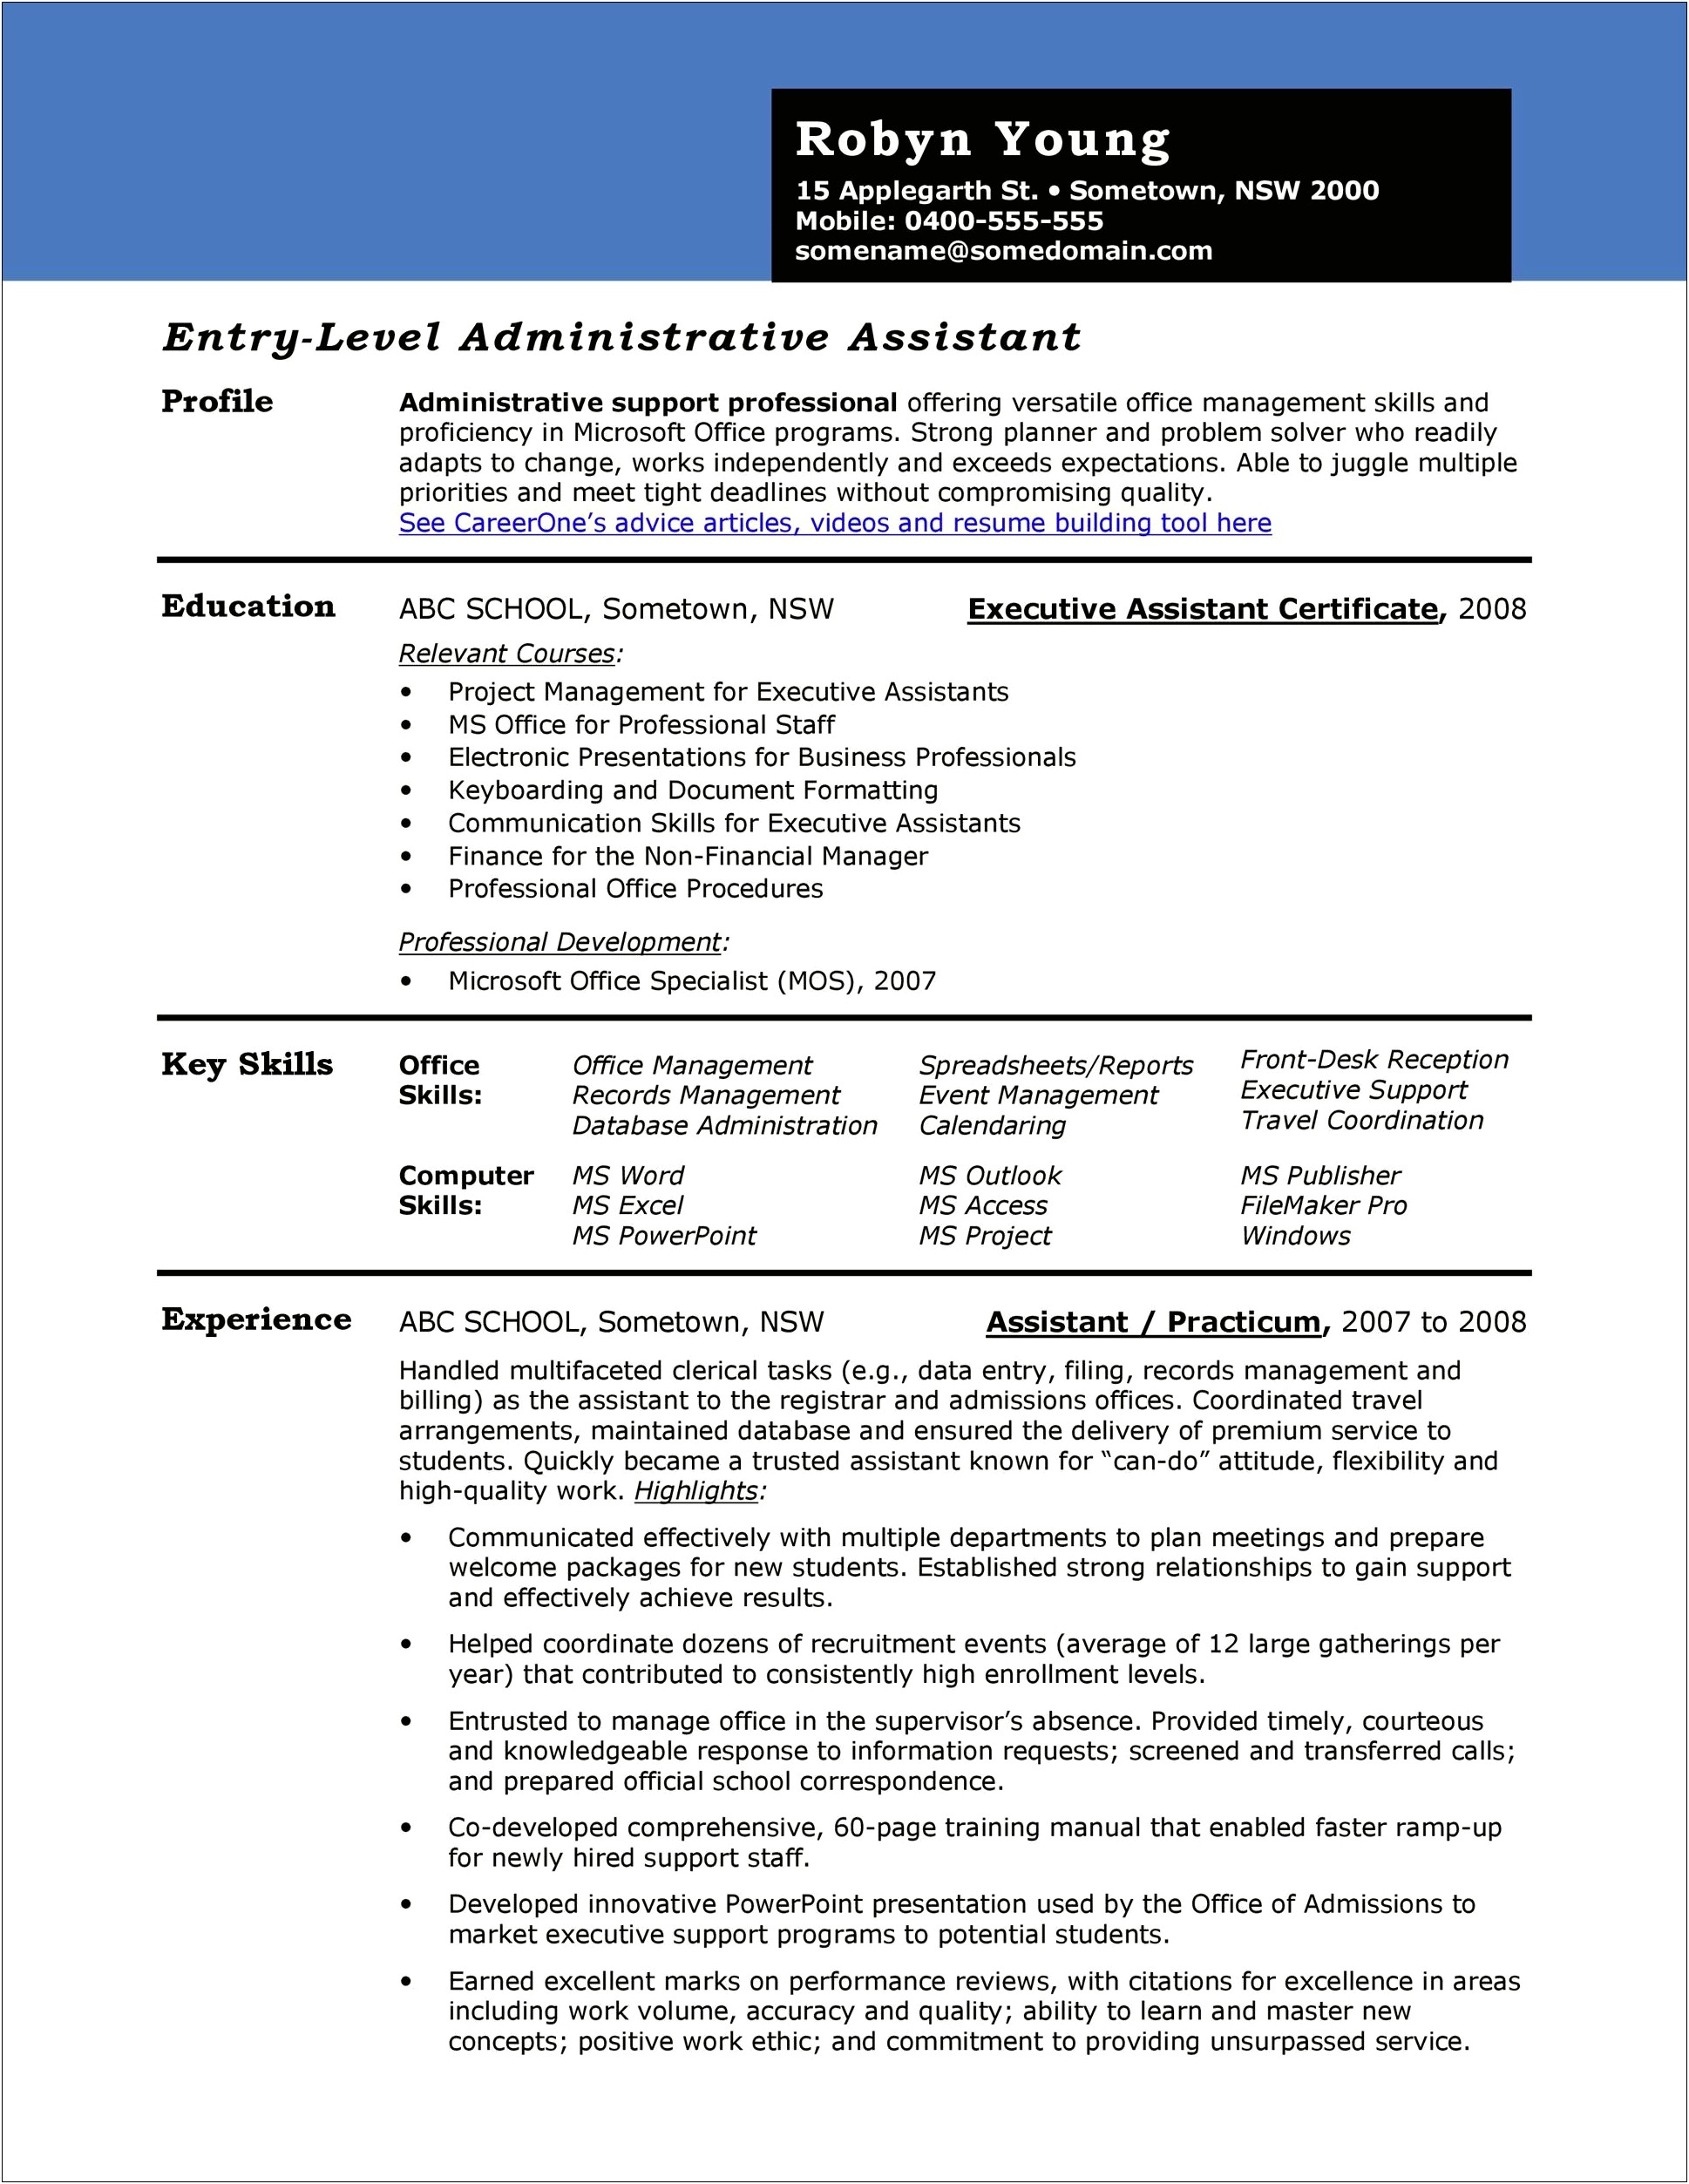 Entry Level Administrative Assistant Resume Templates